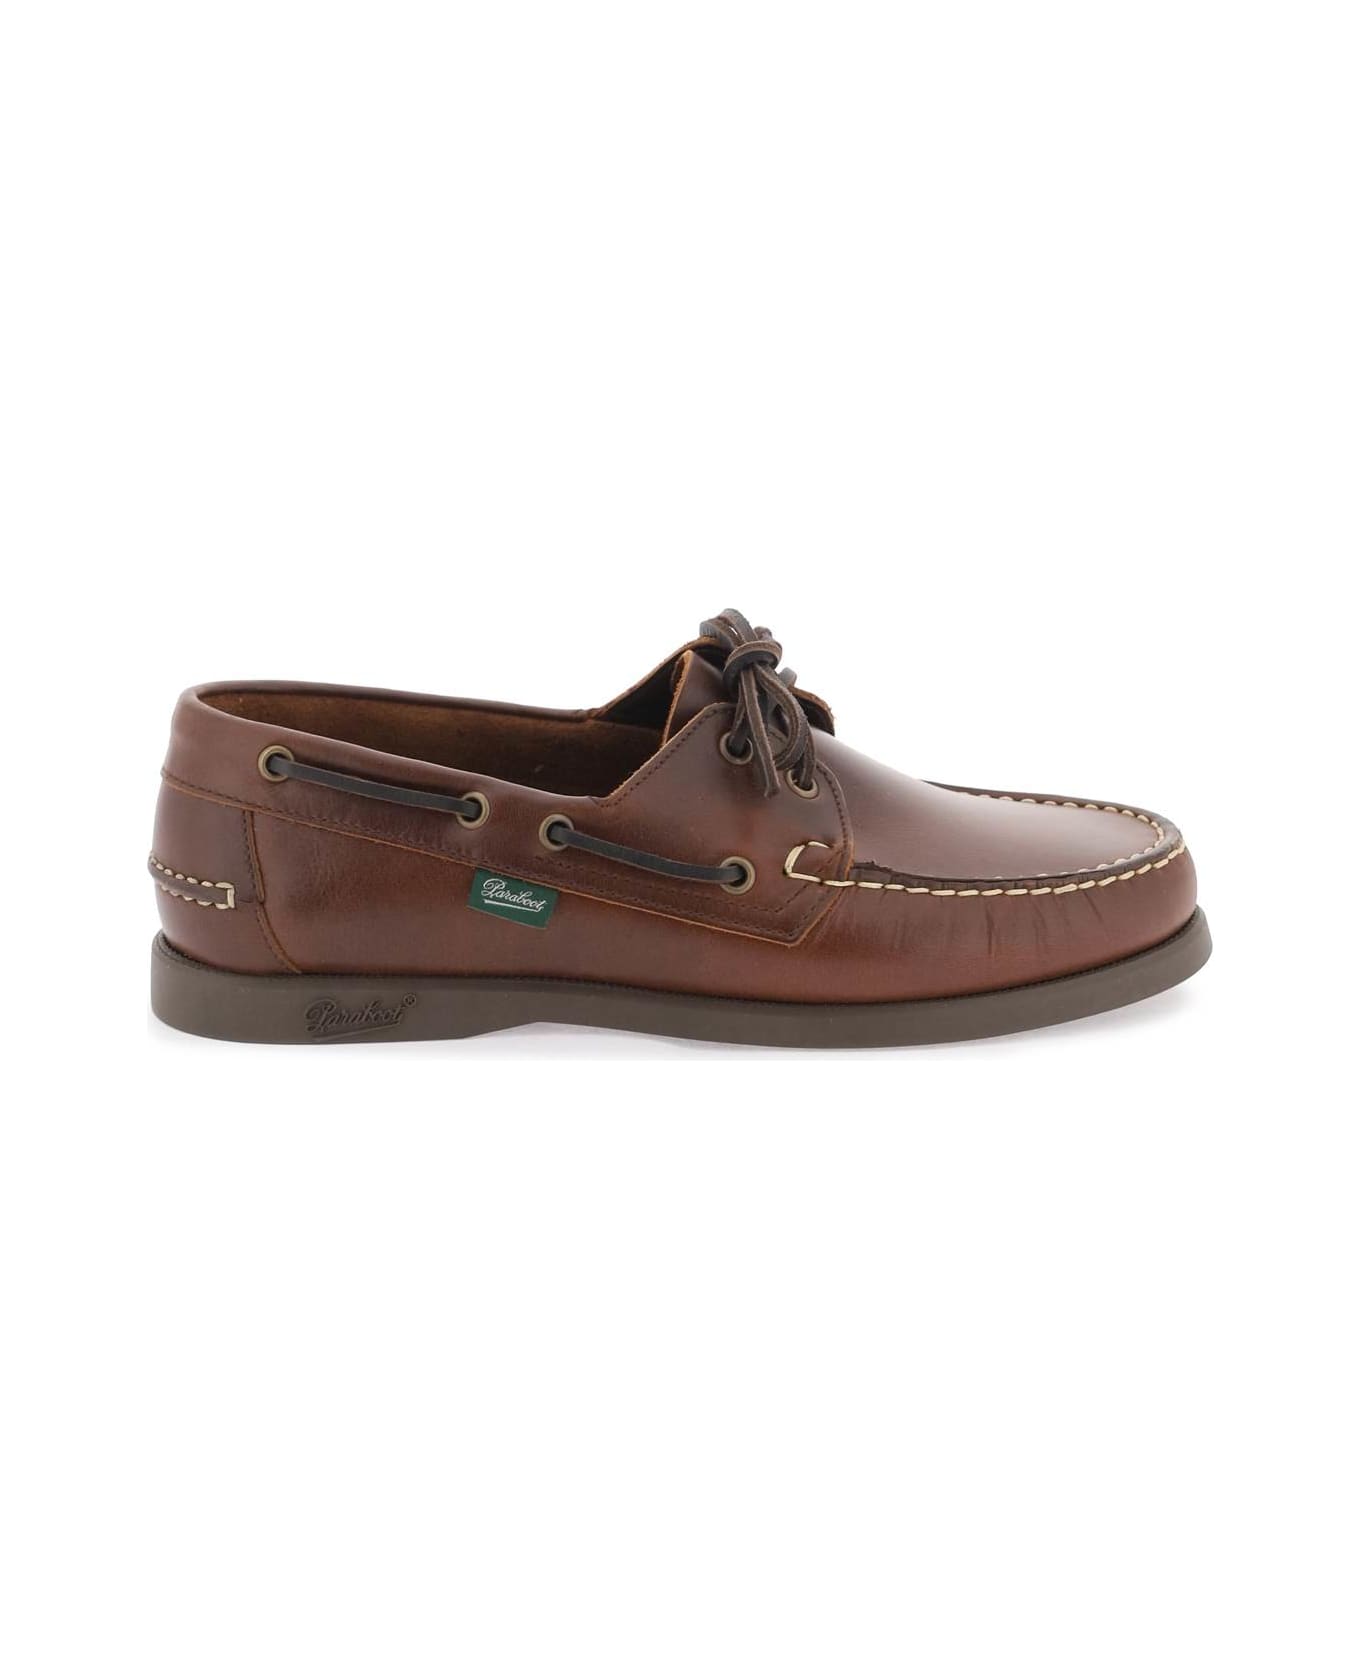 Paraboot Barth Loafers - MARRON LIS AMERICA (Brown) フラットシューズ